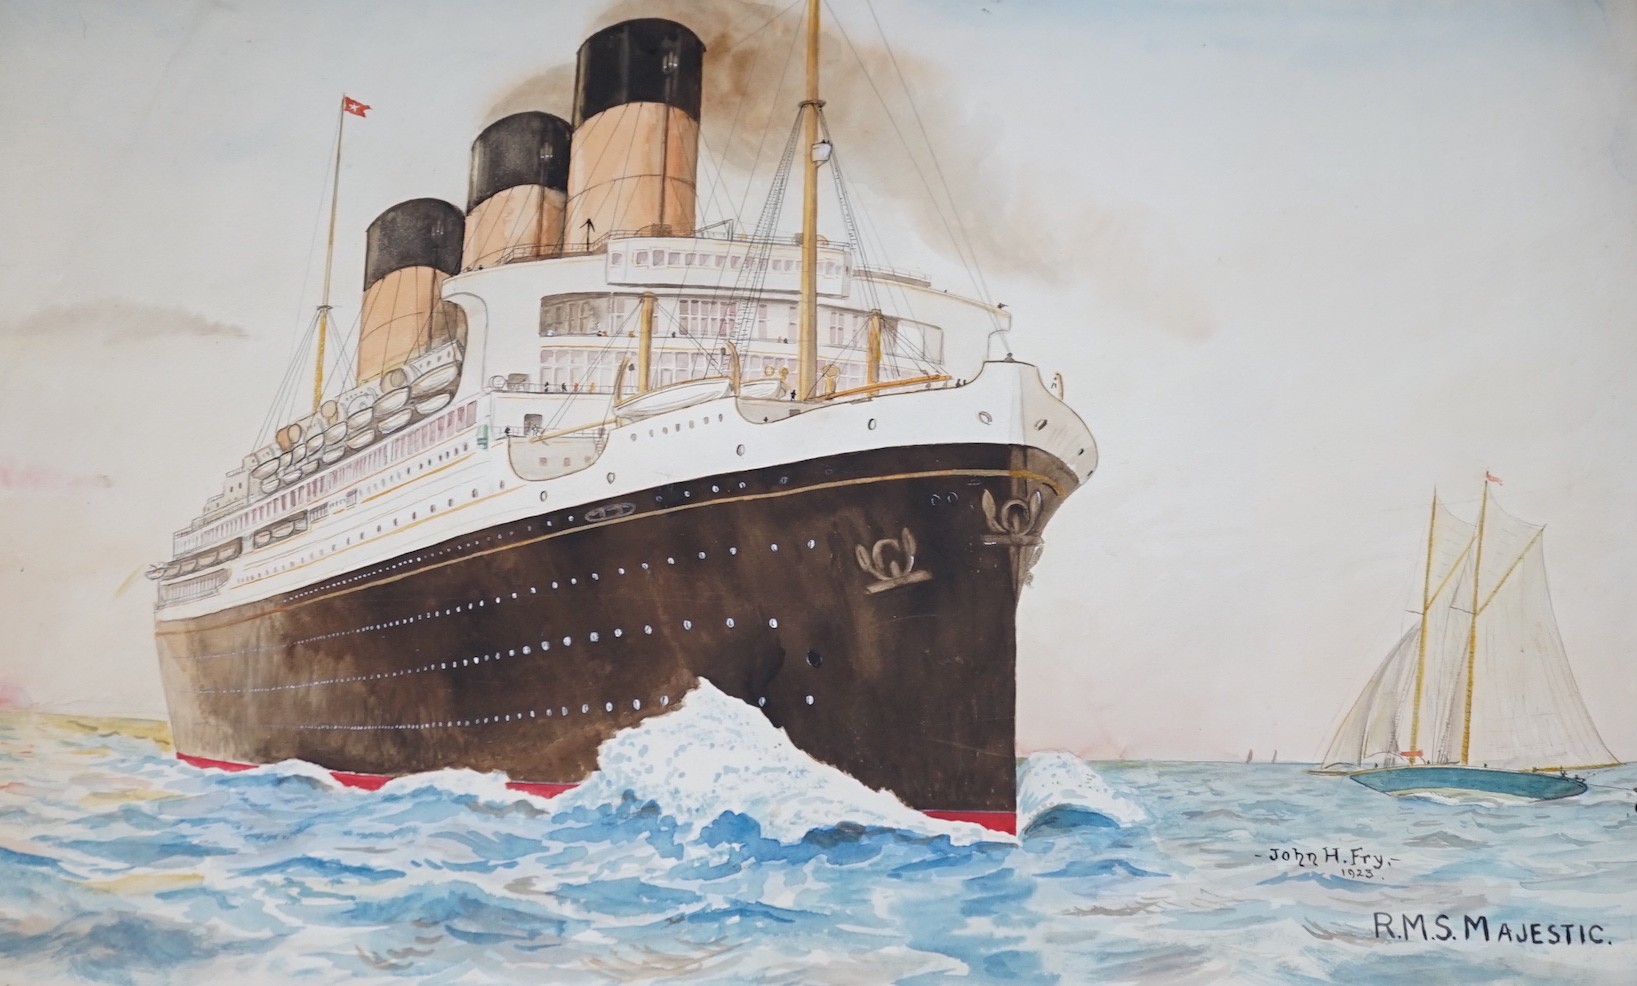 John Hemming Fry (1860-1946), two watercolours, Illustrations of the RMS Majestic and RMS Caernarvon Castle, signed, 47 x 70cm, unframed (original postcards artwork)